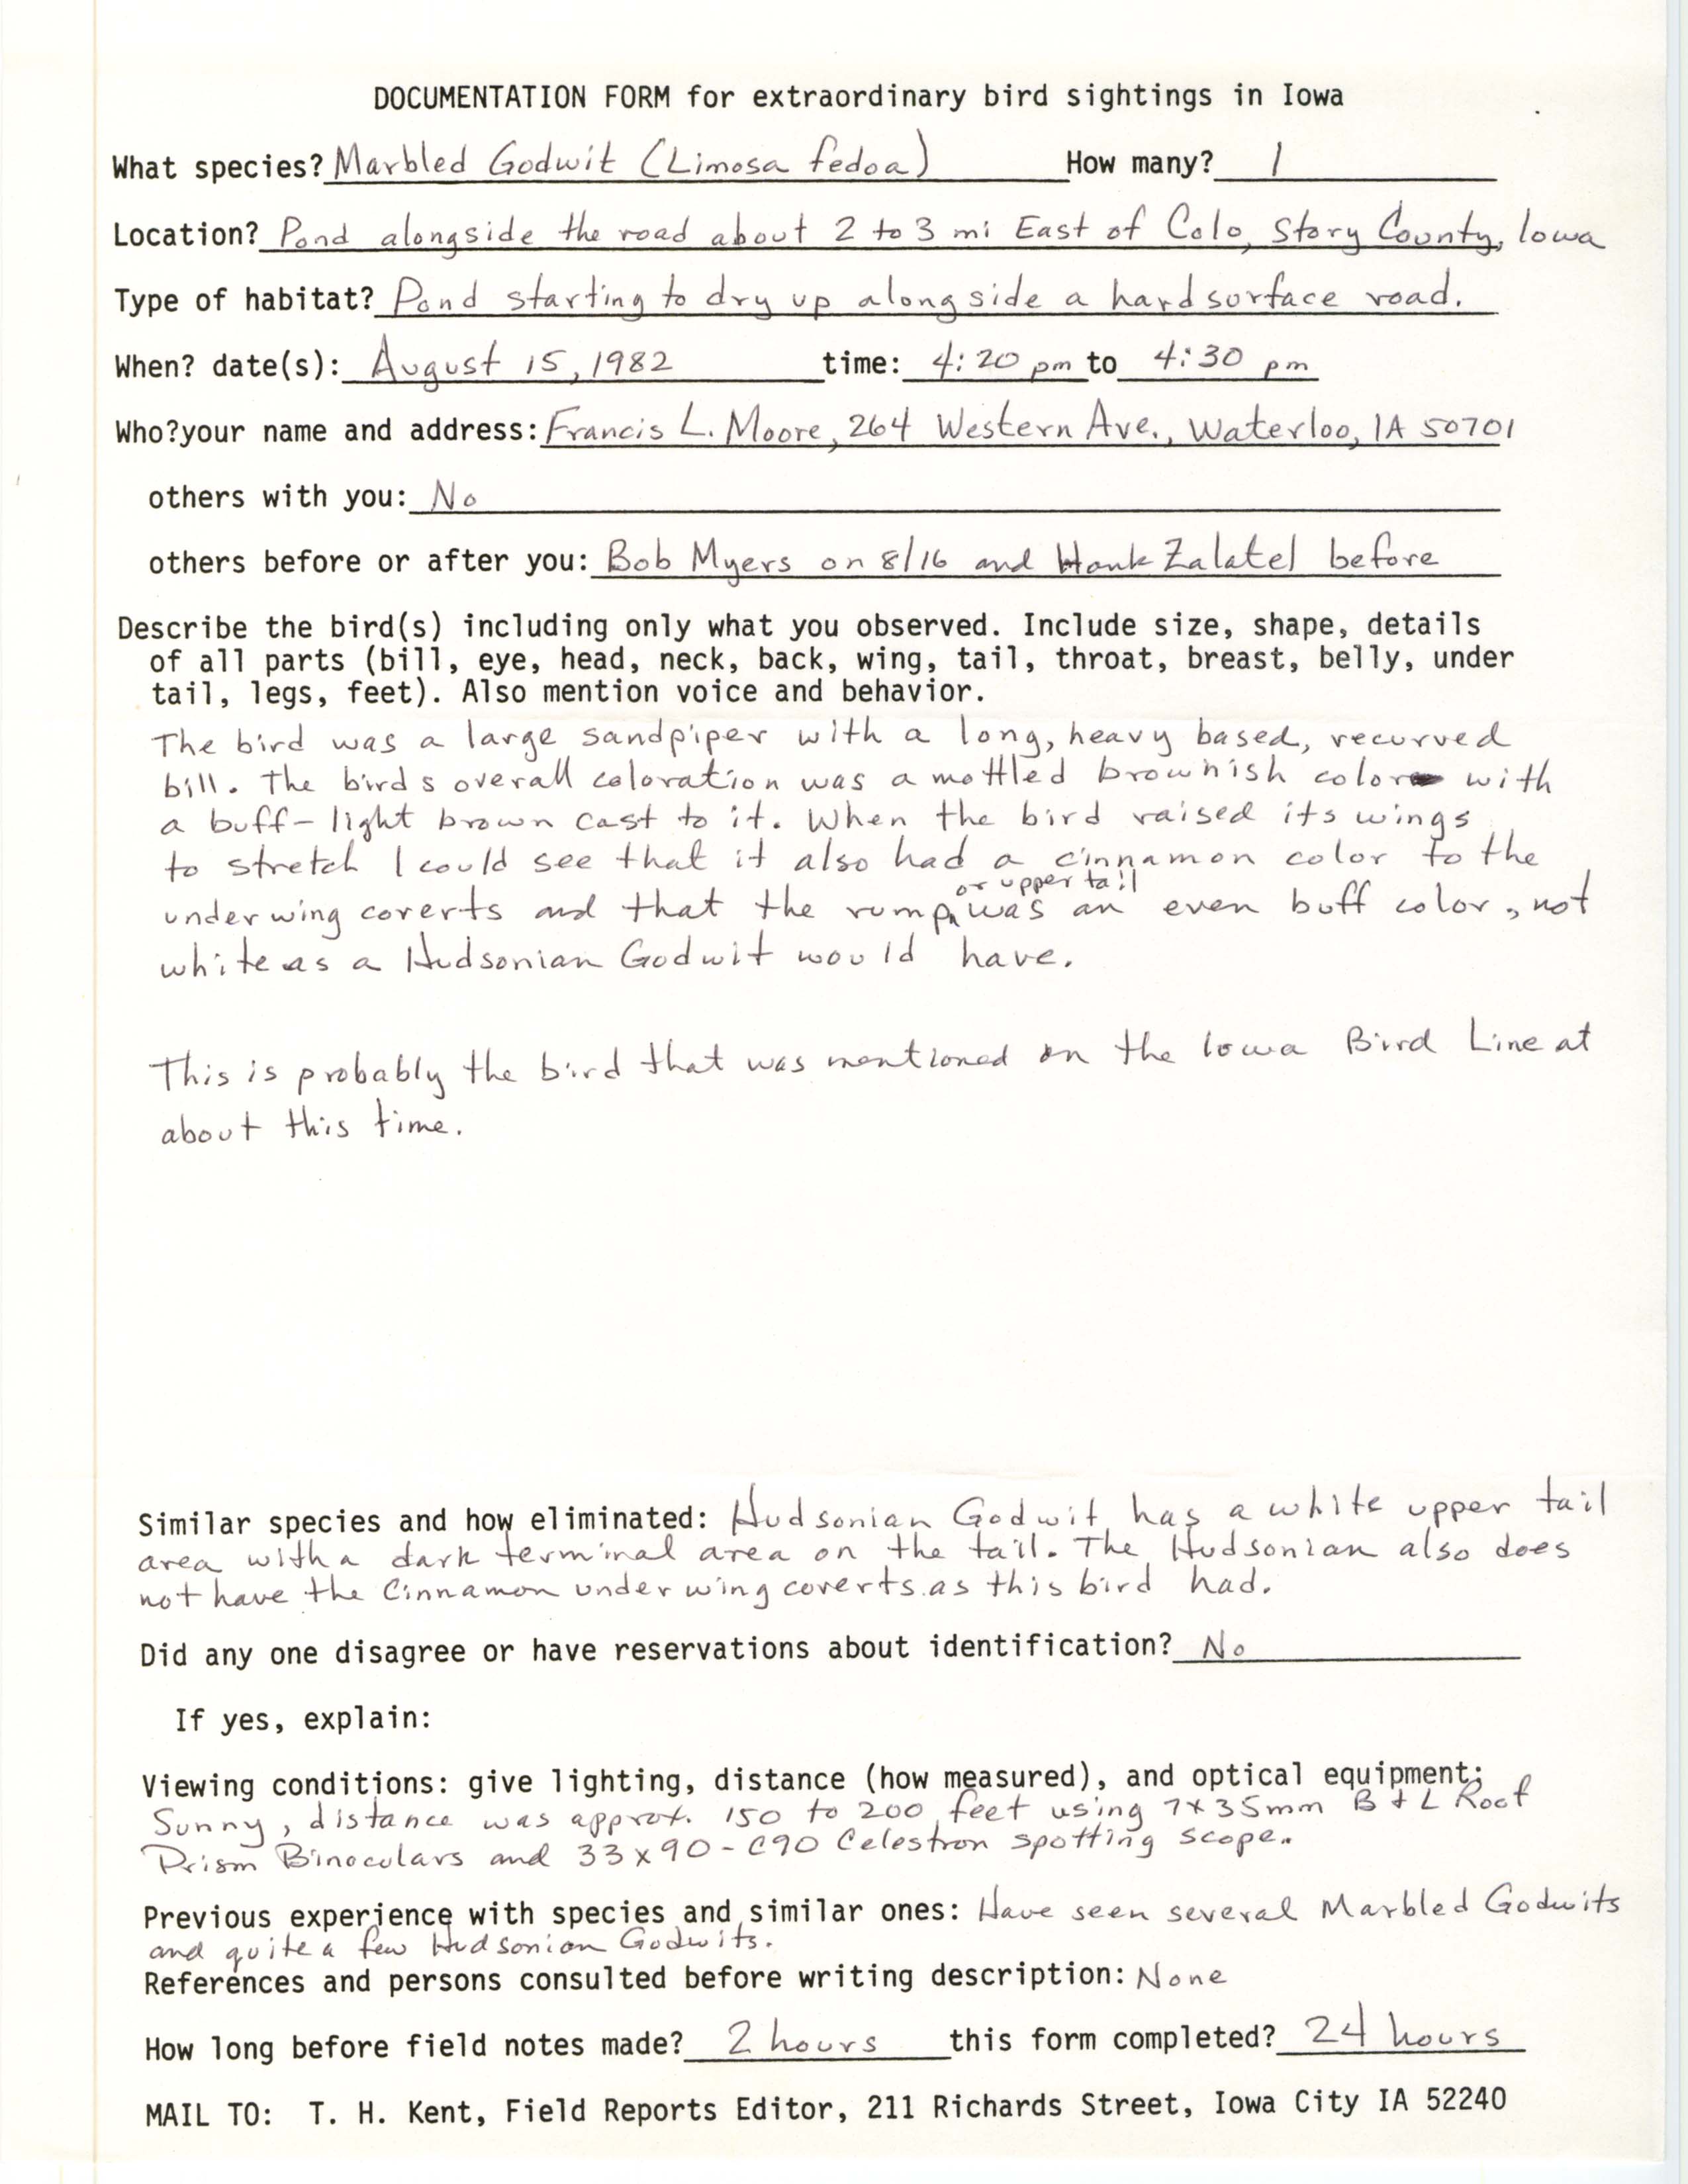 Rare bird documentation form for Marbled Godwit east of Colo, 1982